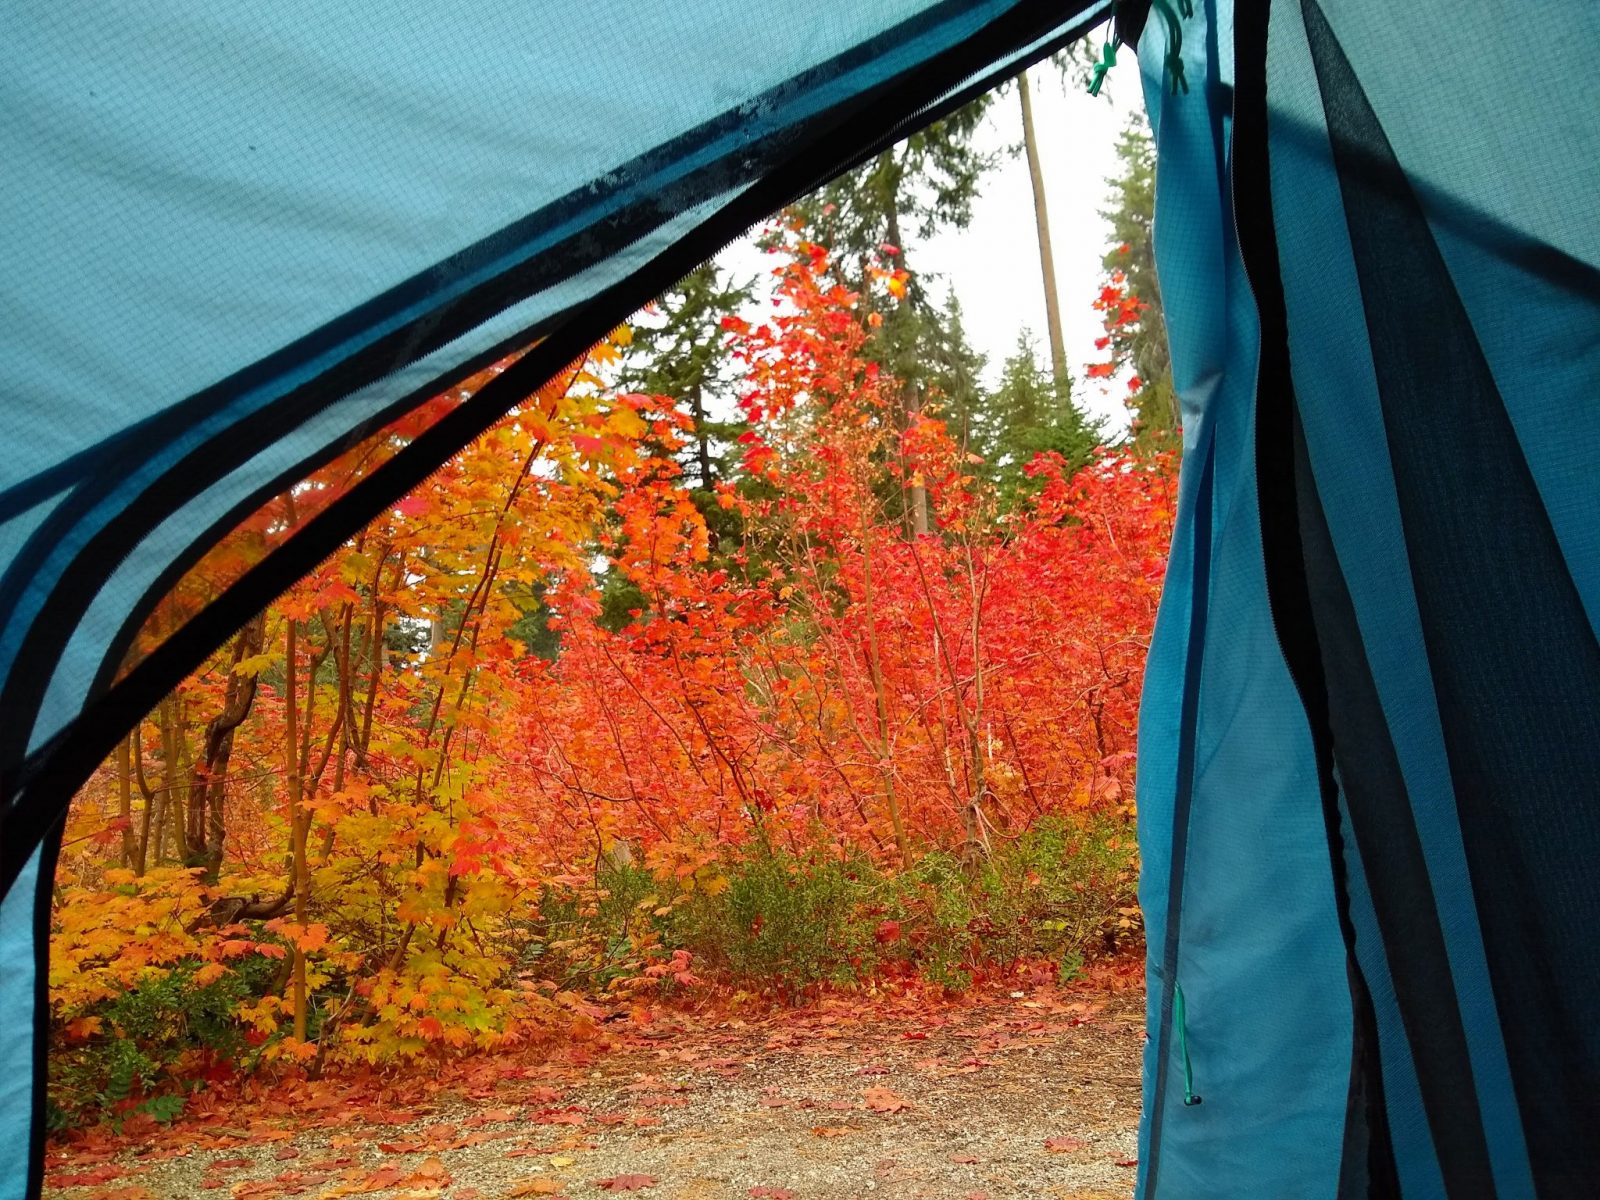 A view through the open door of a blue tent in the Lake wenatchee campground. There are green trees and bright orange and red vine maples outside the door.